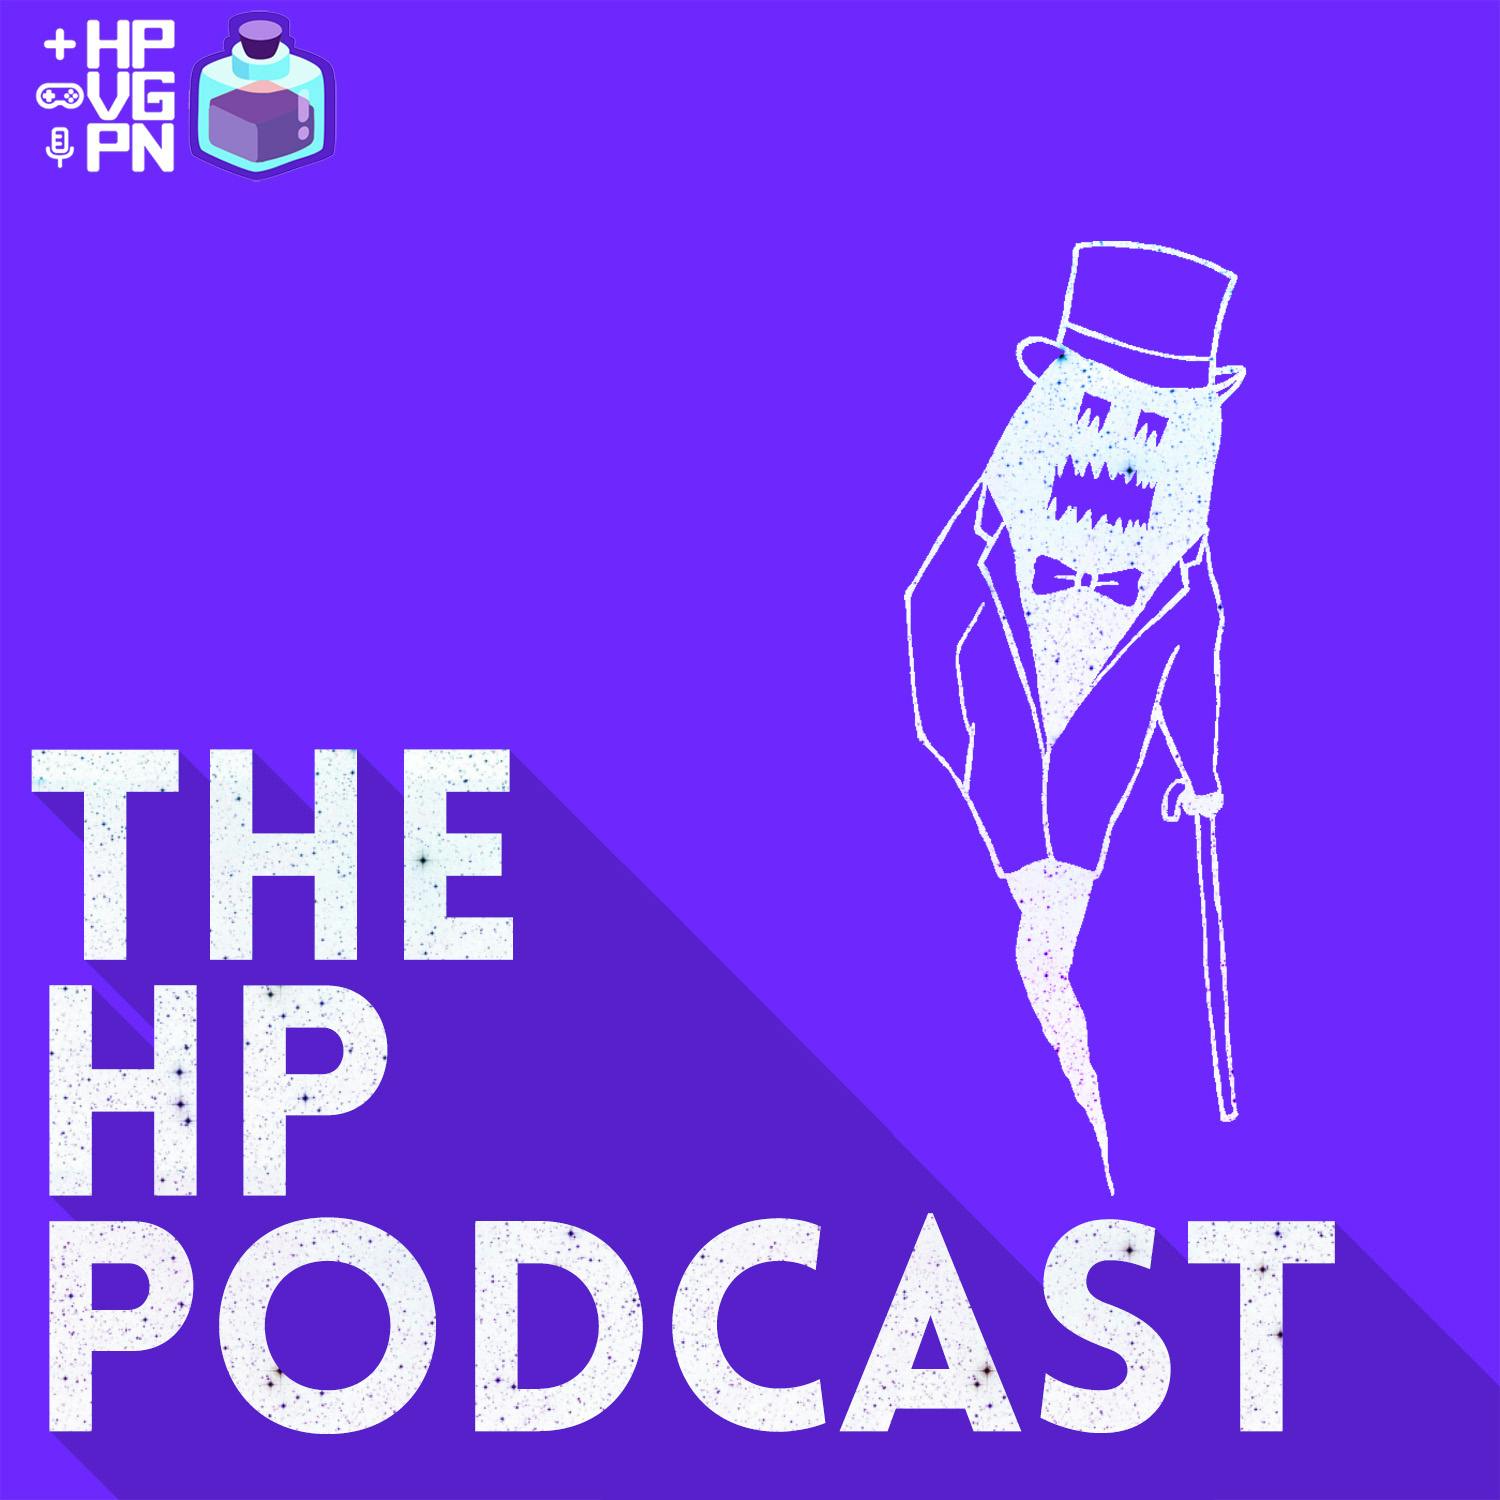 The PlayStation 5 is Finally Here - The HP Podcast Episode #96